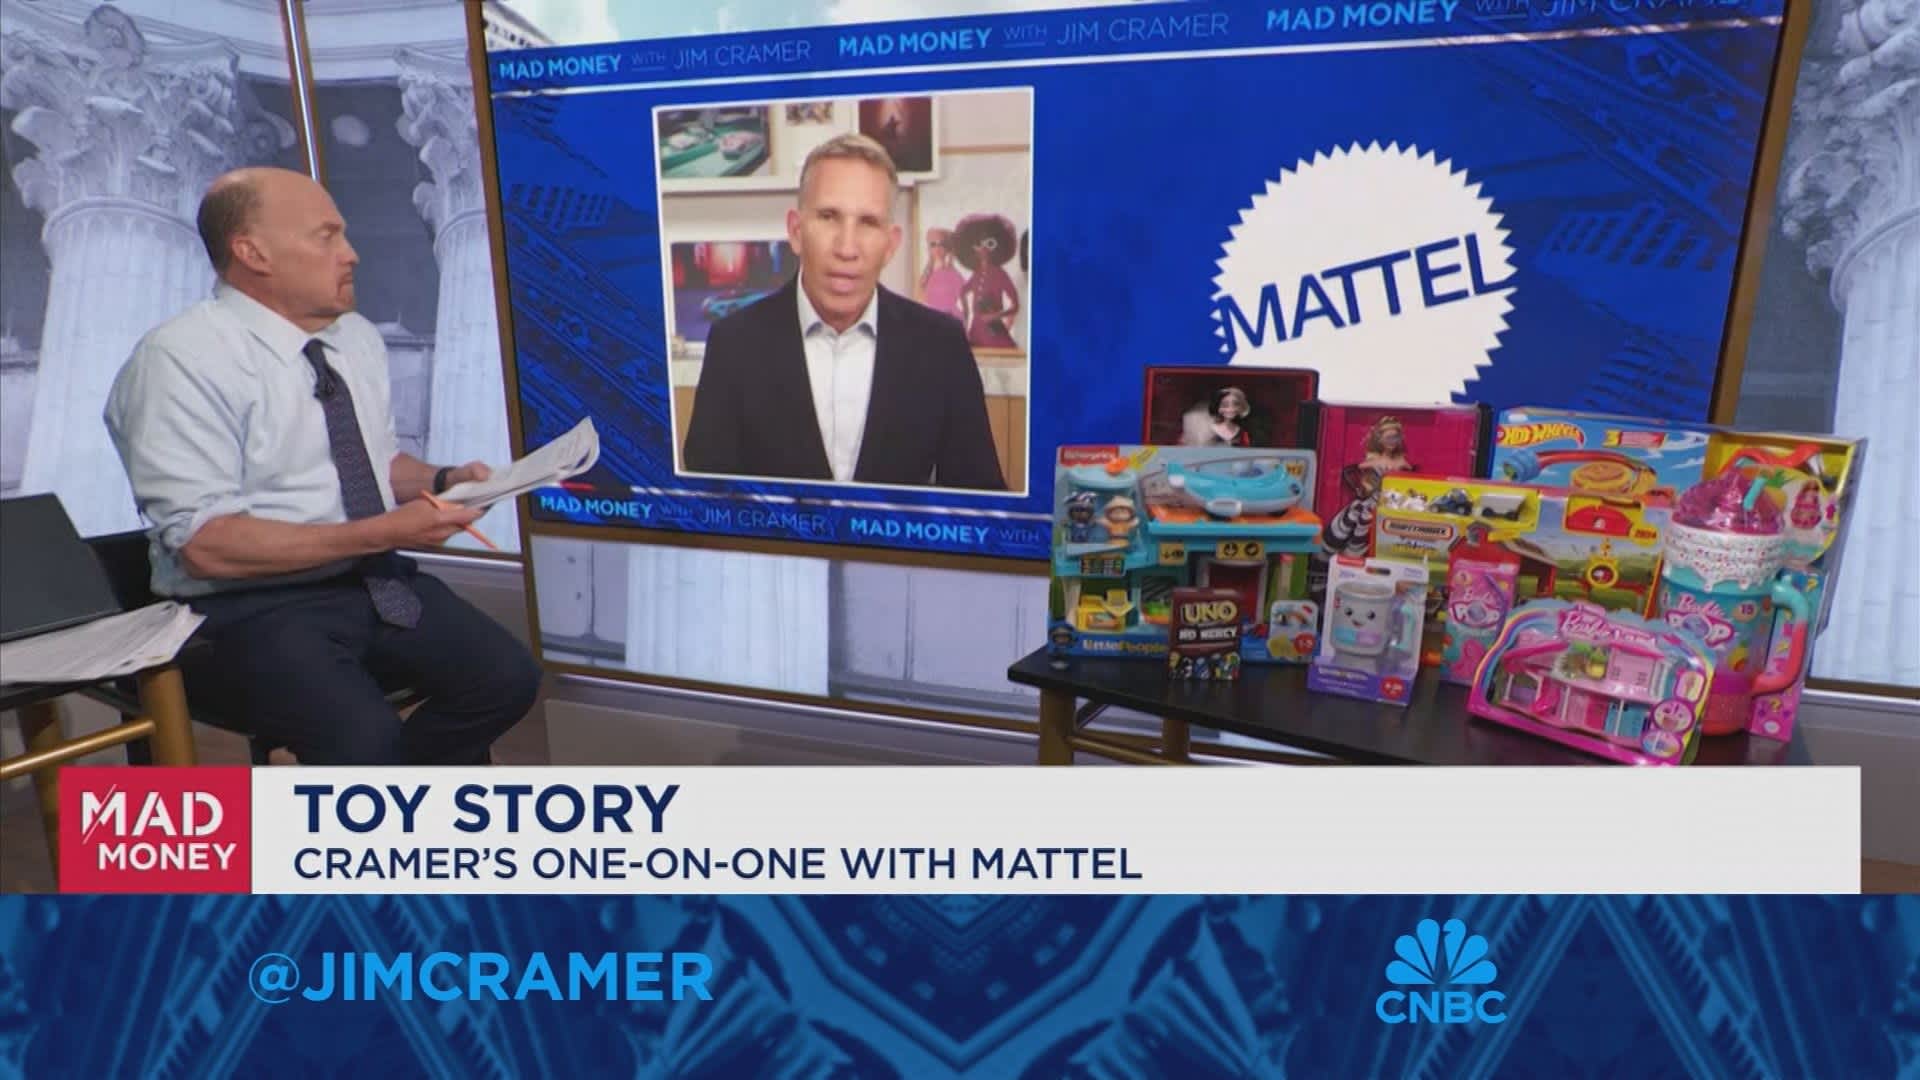 Our top priority is driving organic growth, says Mattel CEO Ynon Kreiz [Video]